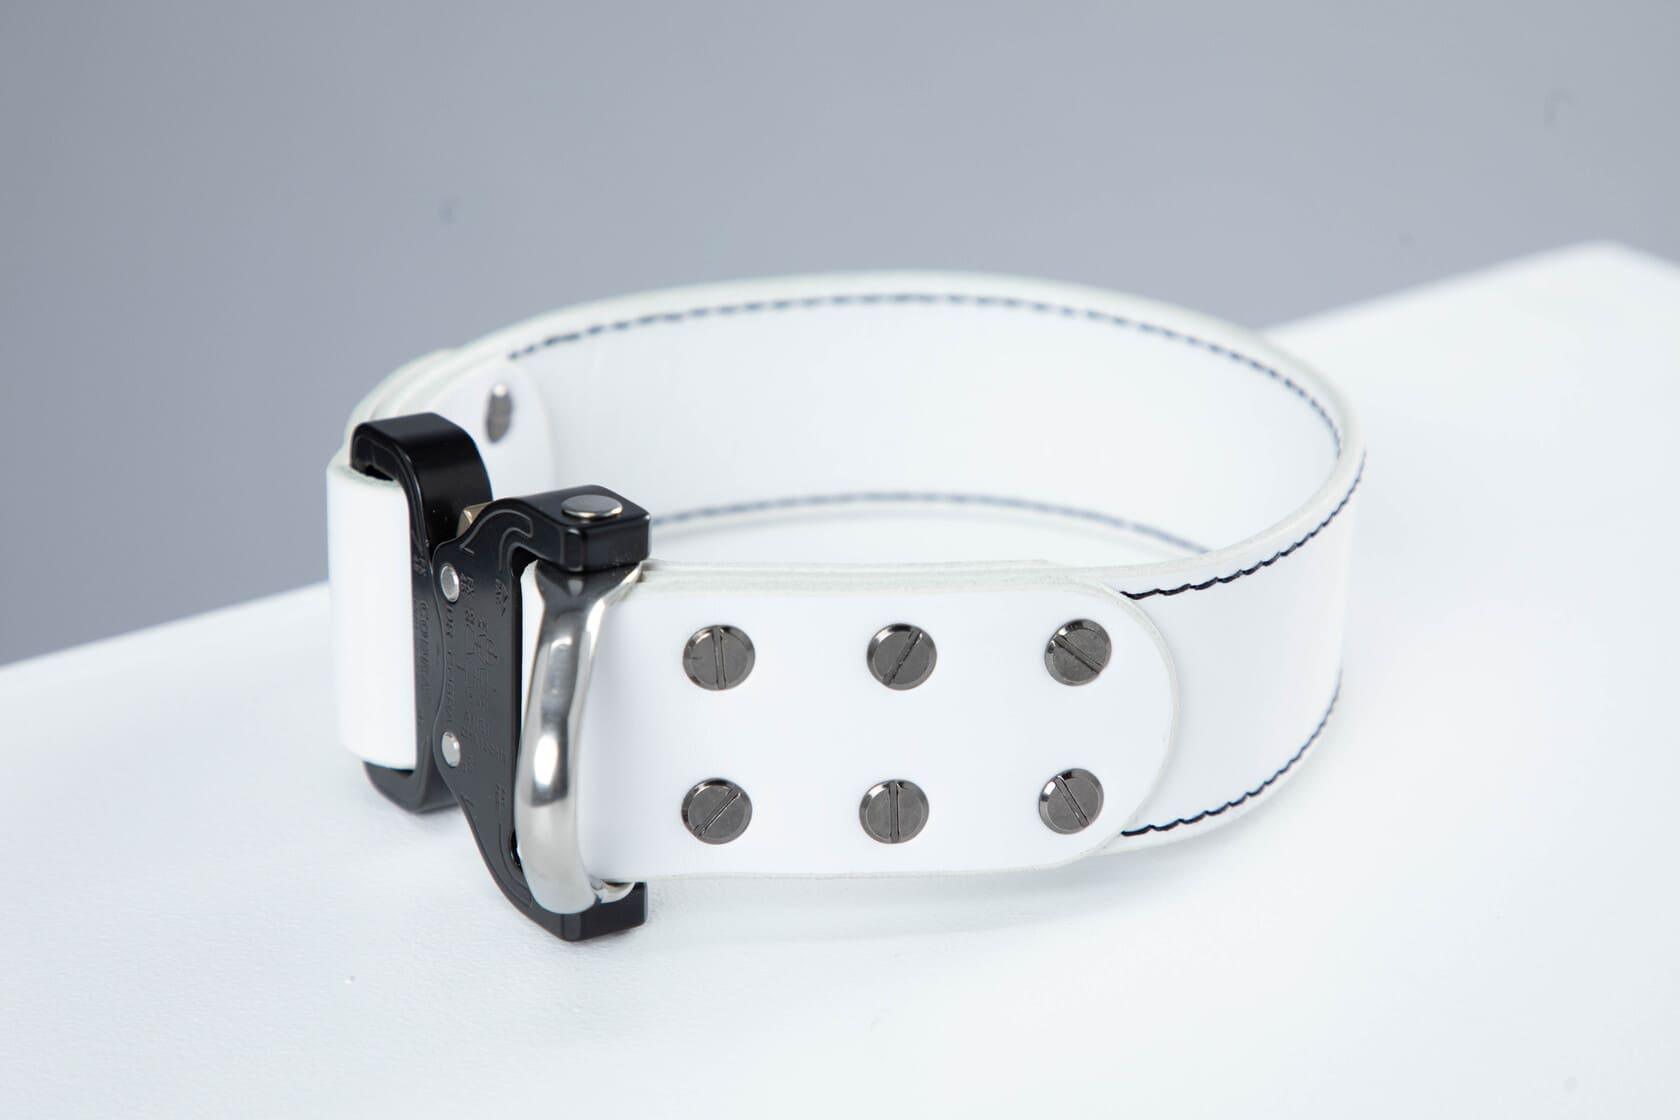 White leather dog collar with COBRA® buckle - European handmade dog accessories by My Wild Other